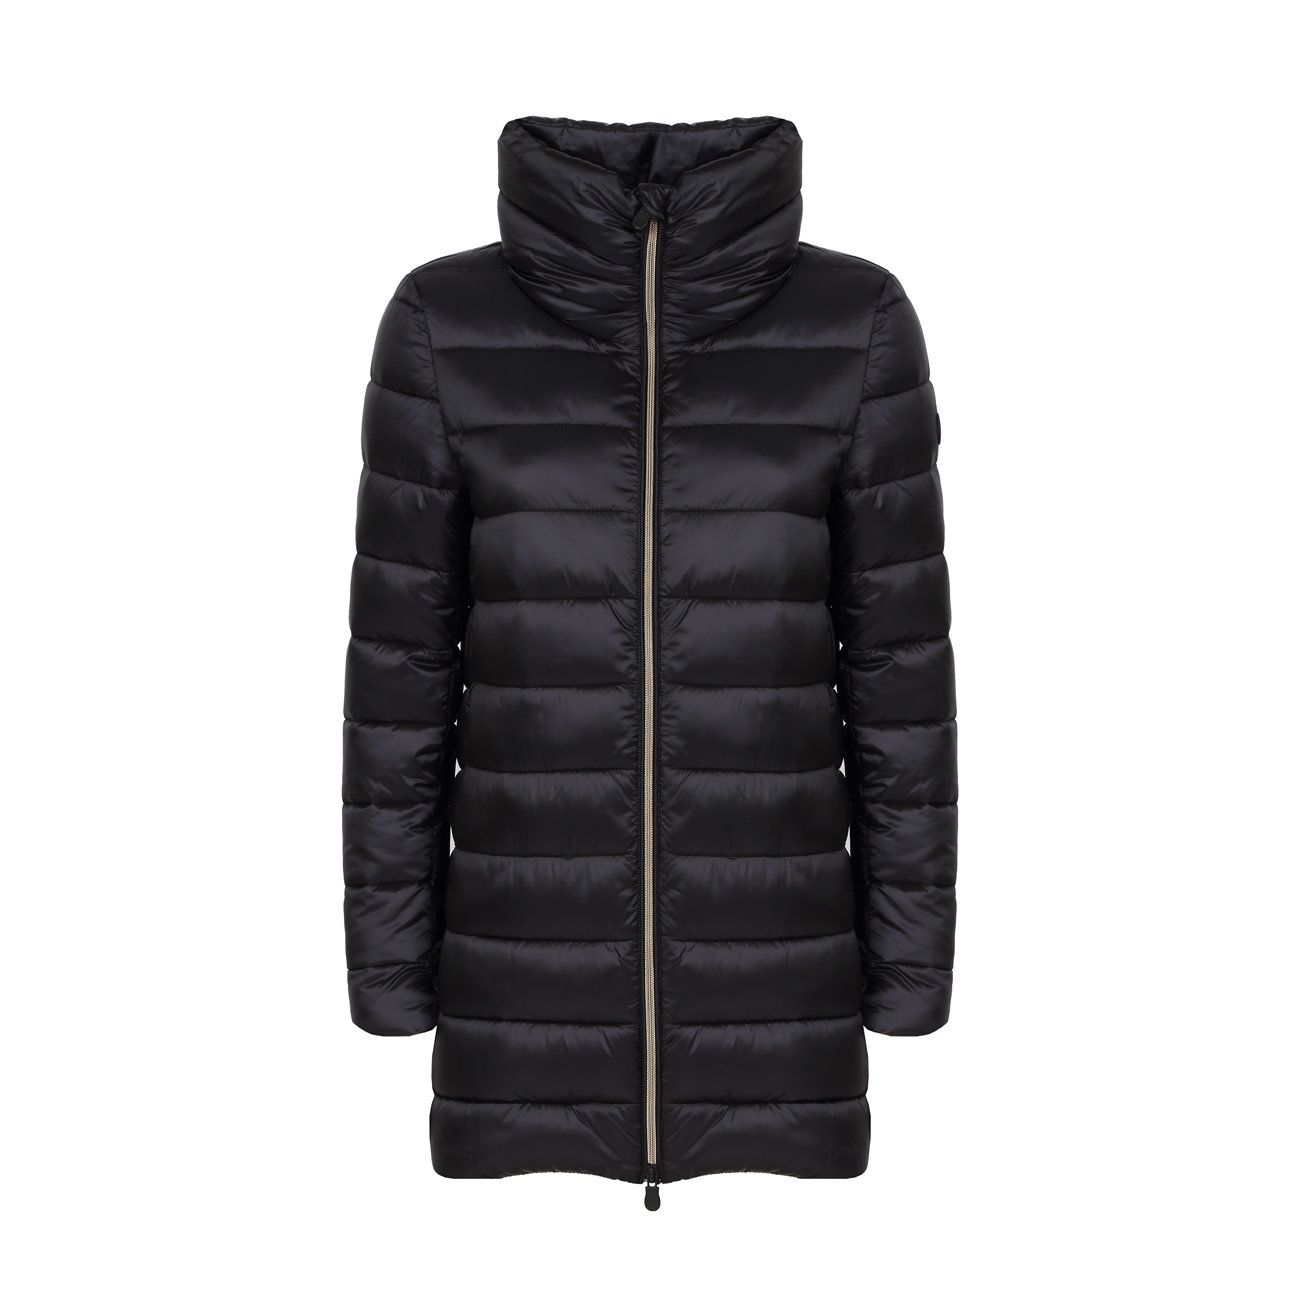 LONG DOWN JACKET WITH HIGH NECK IN SATIN NYLON Woman Black